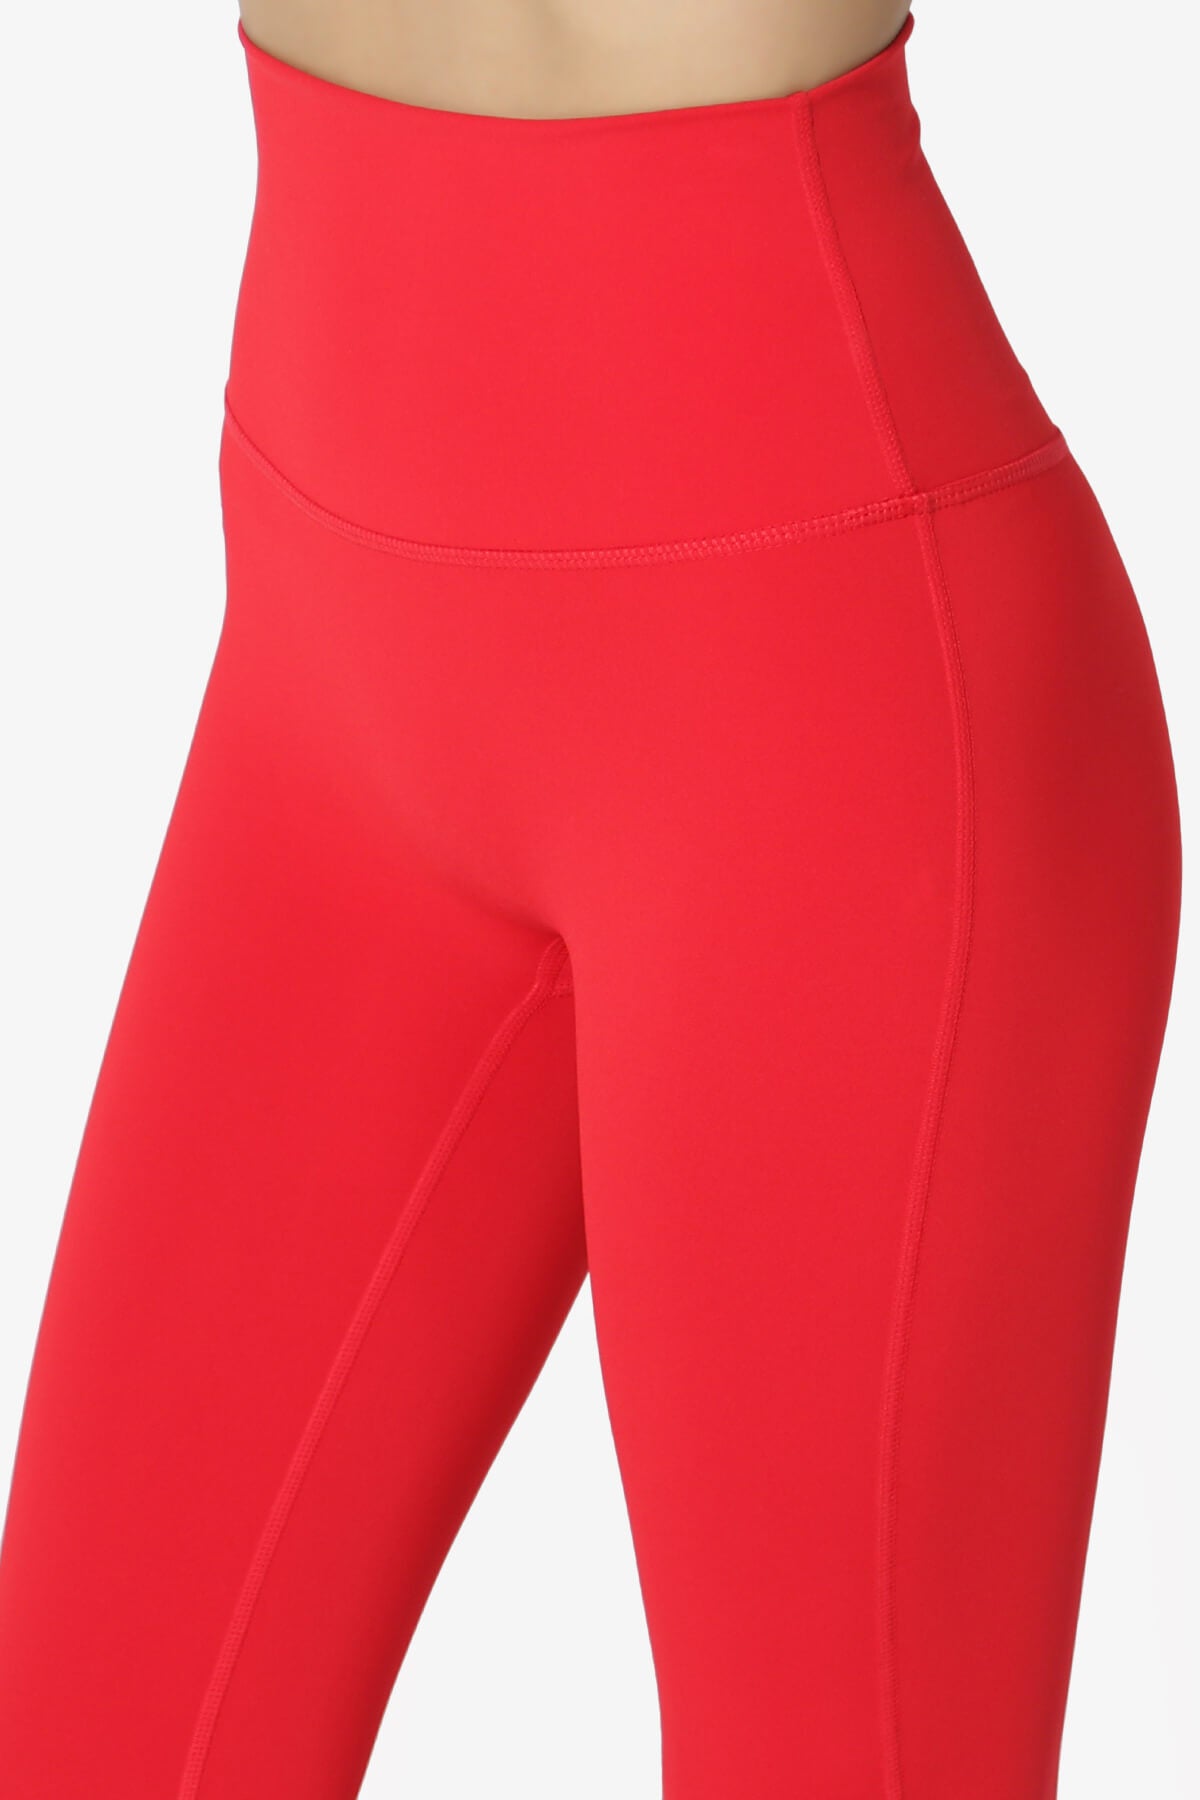 Mosco Athletic High Rise Ankle Leggings RED_5